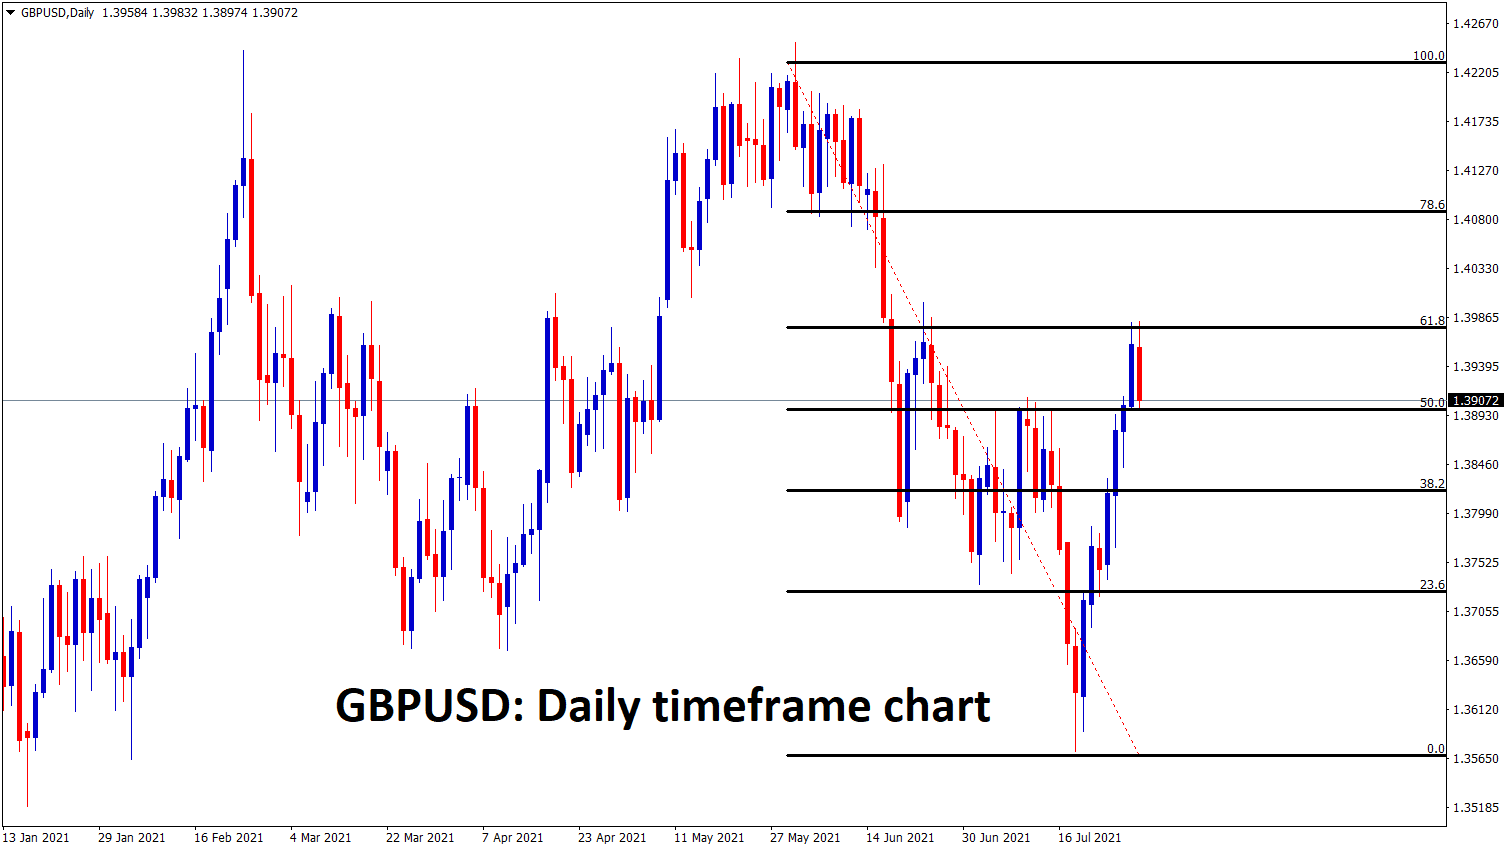 GBPUSD has made a correction from 61 to 50 in the daily timeframe